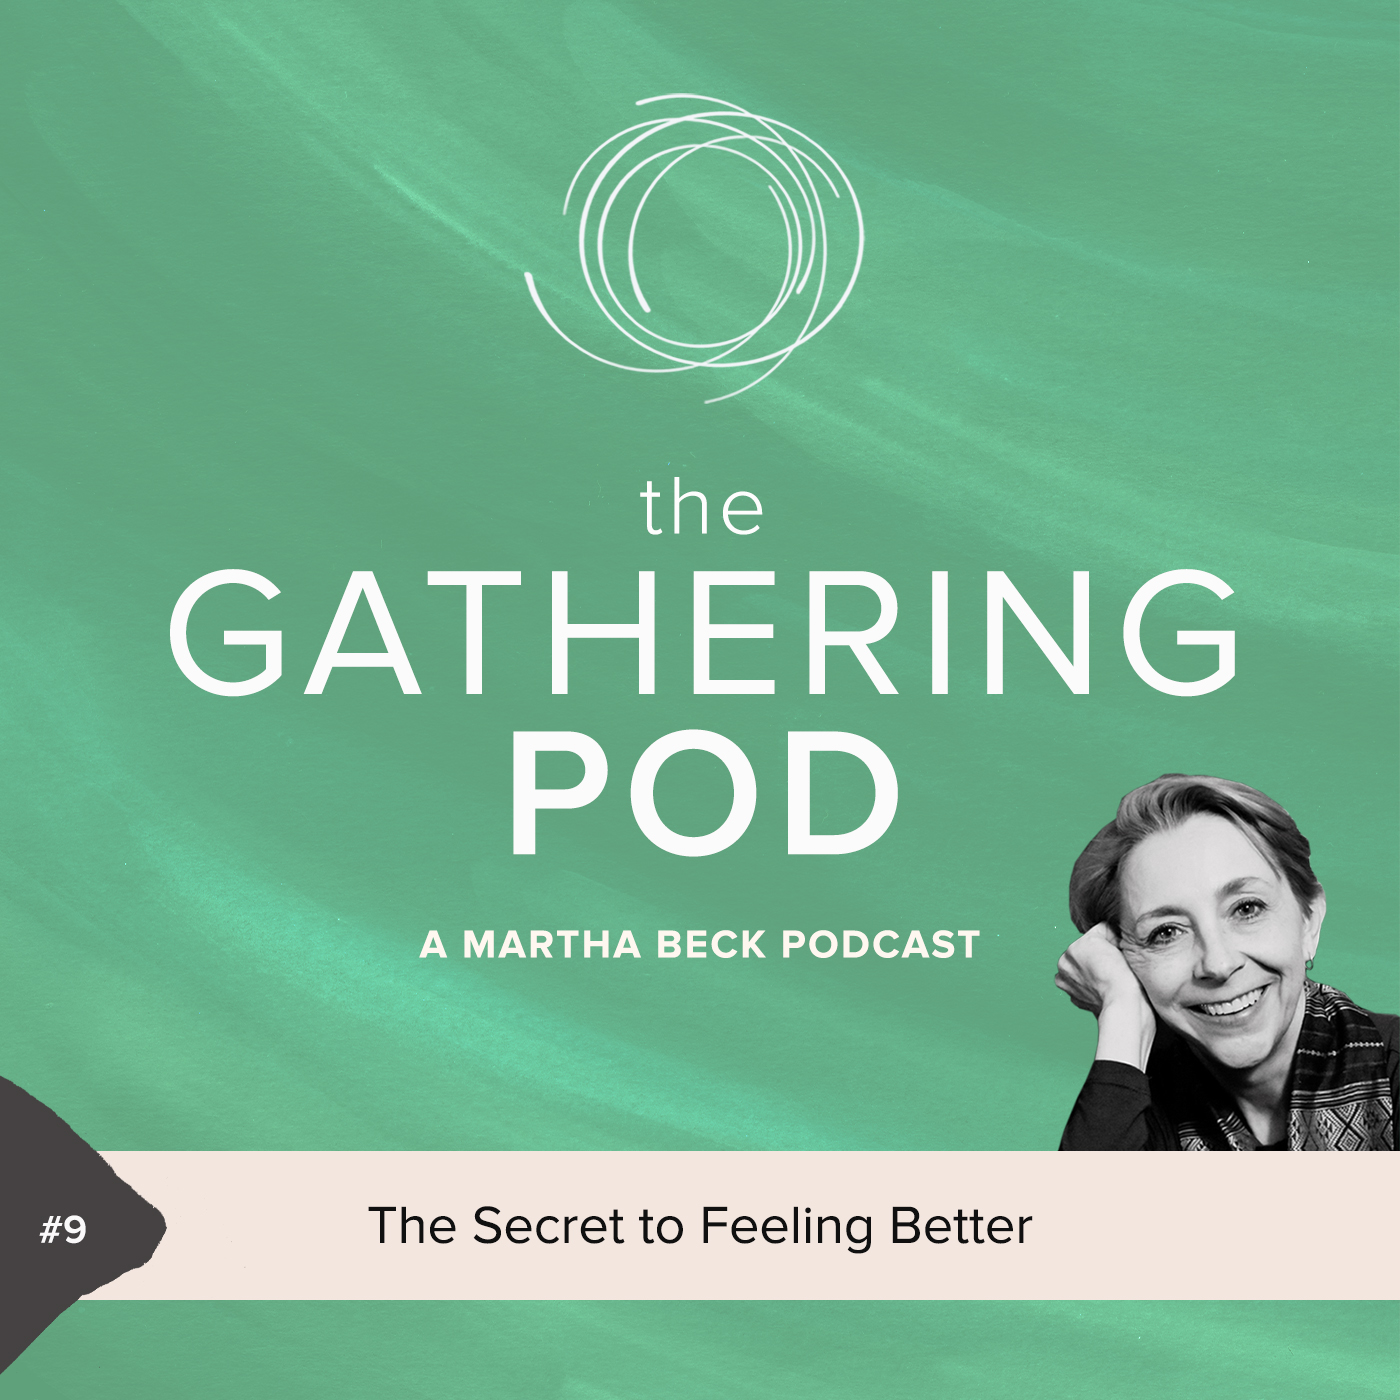 Image for The Gathering Pod A Martha Beck Podcast Episode #9 The Secret to Feeling Better